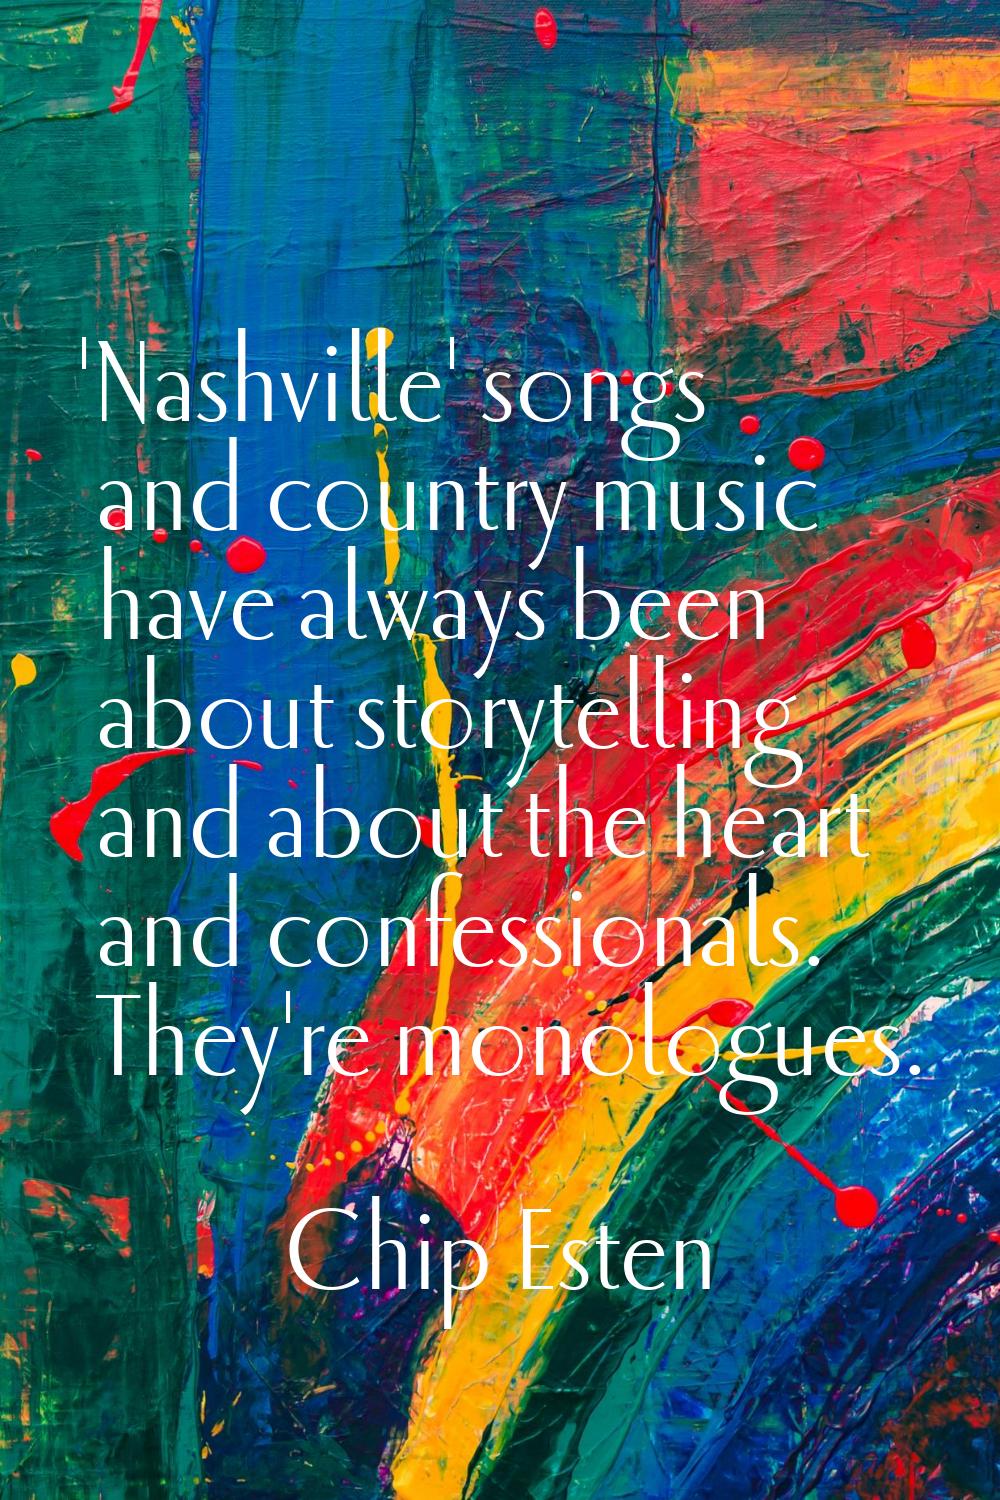 'Nashville' songs and country music have always been about storytelling and about the heart and con